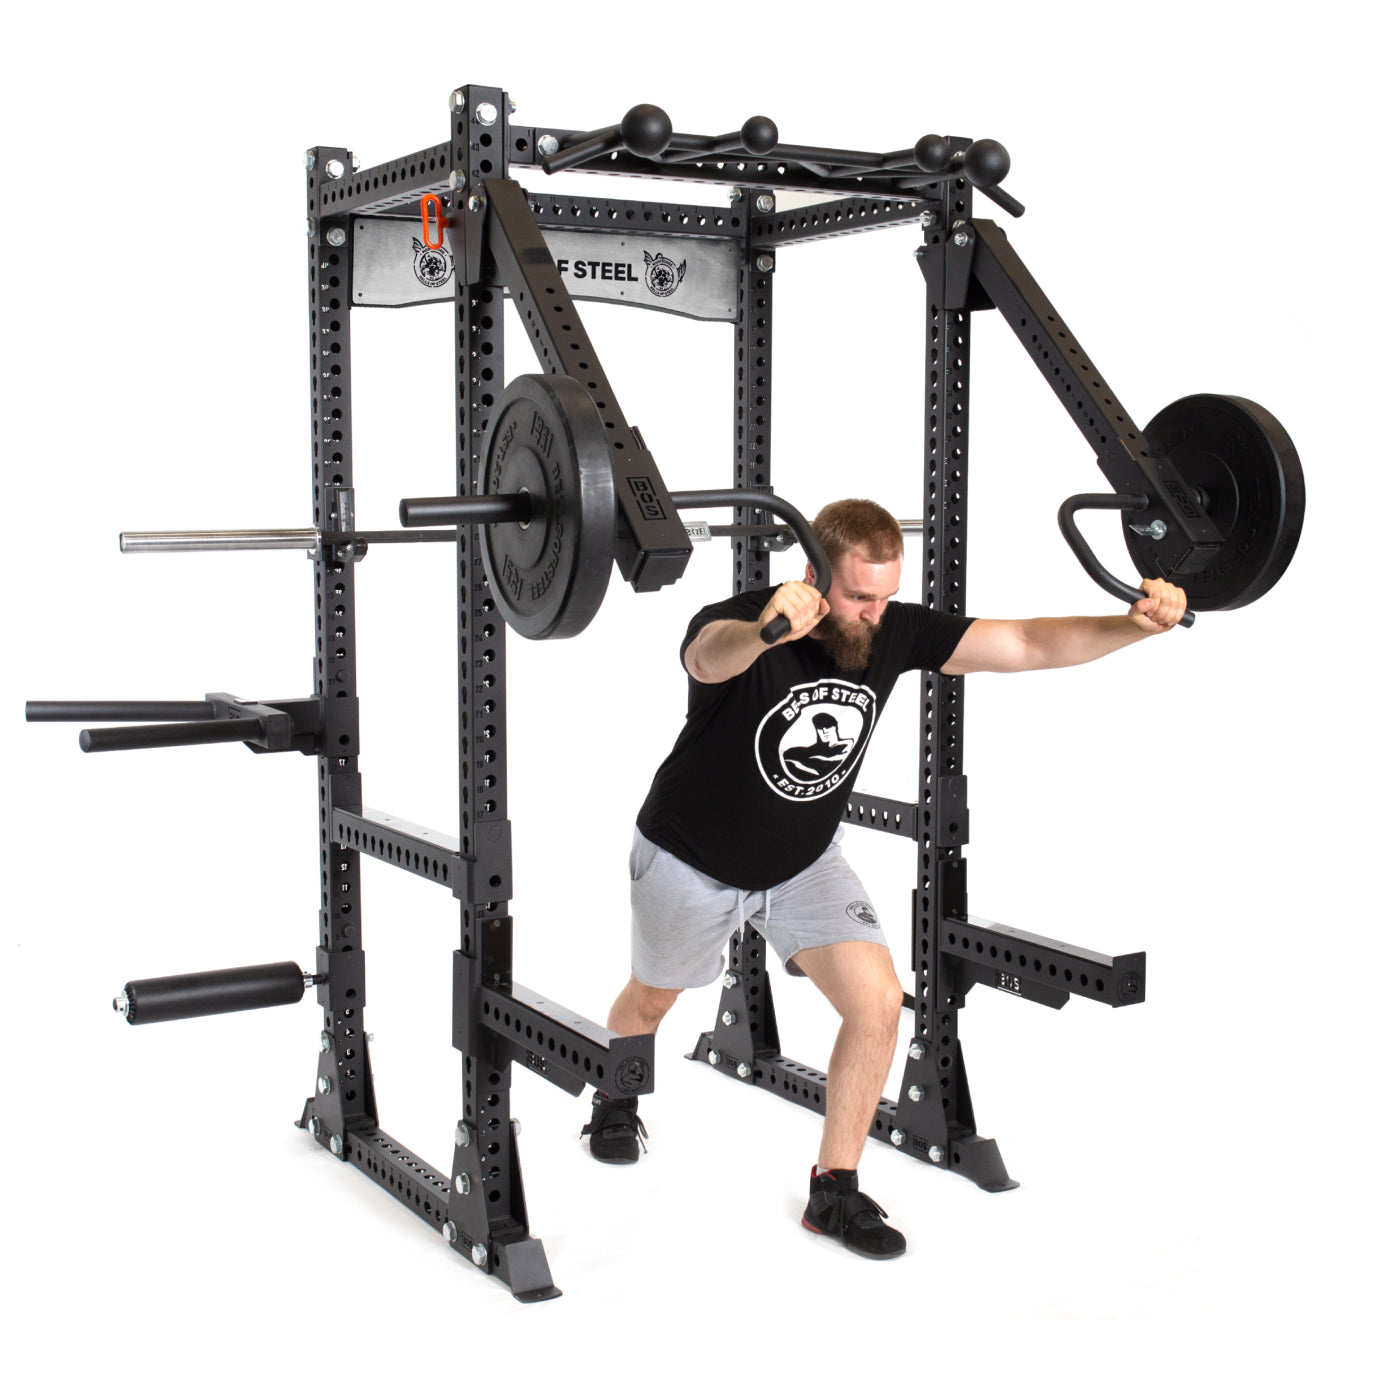 Manticore flat foot power rack with lever arms